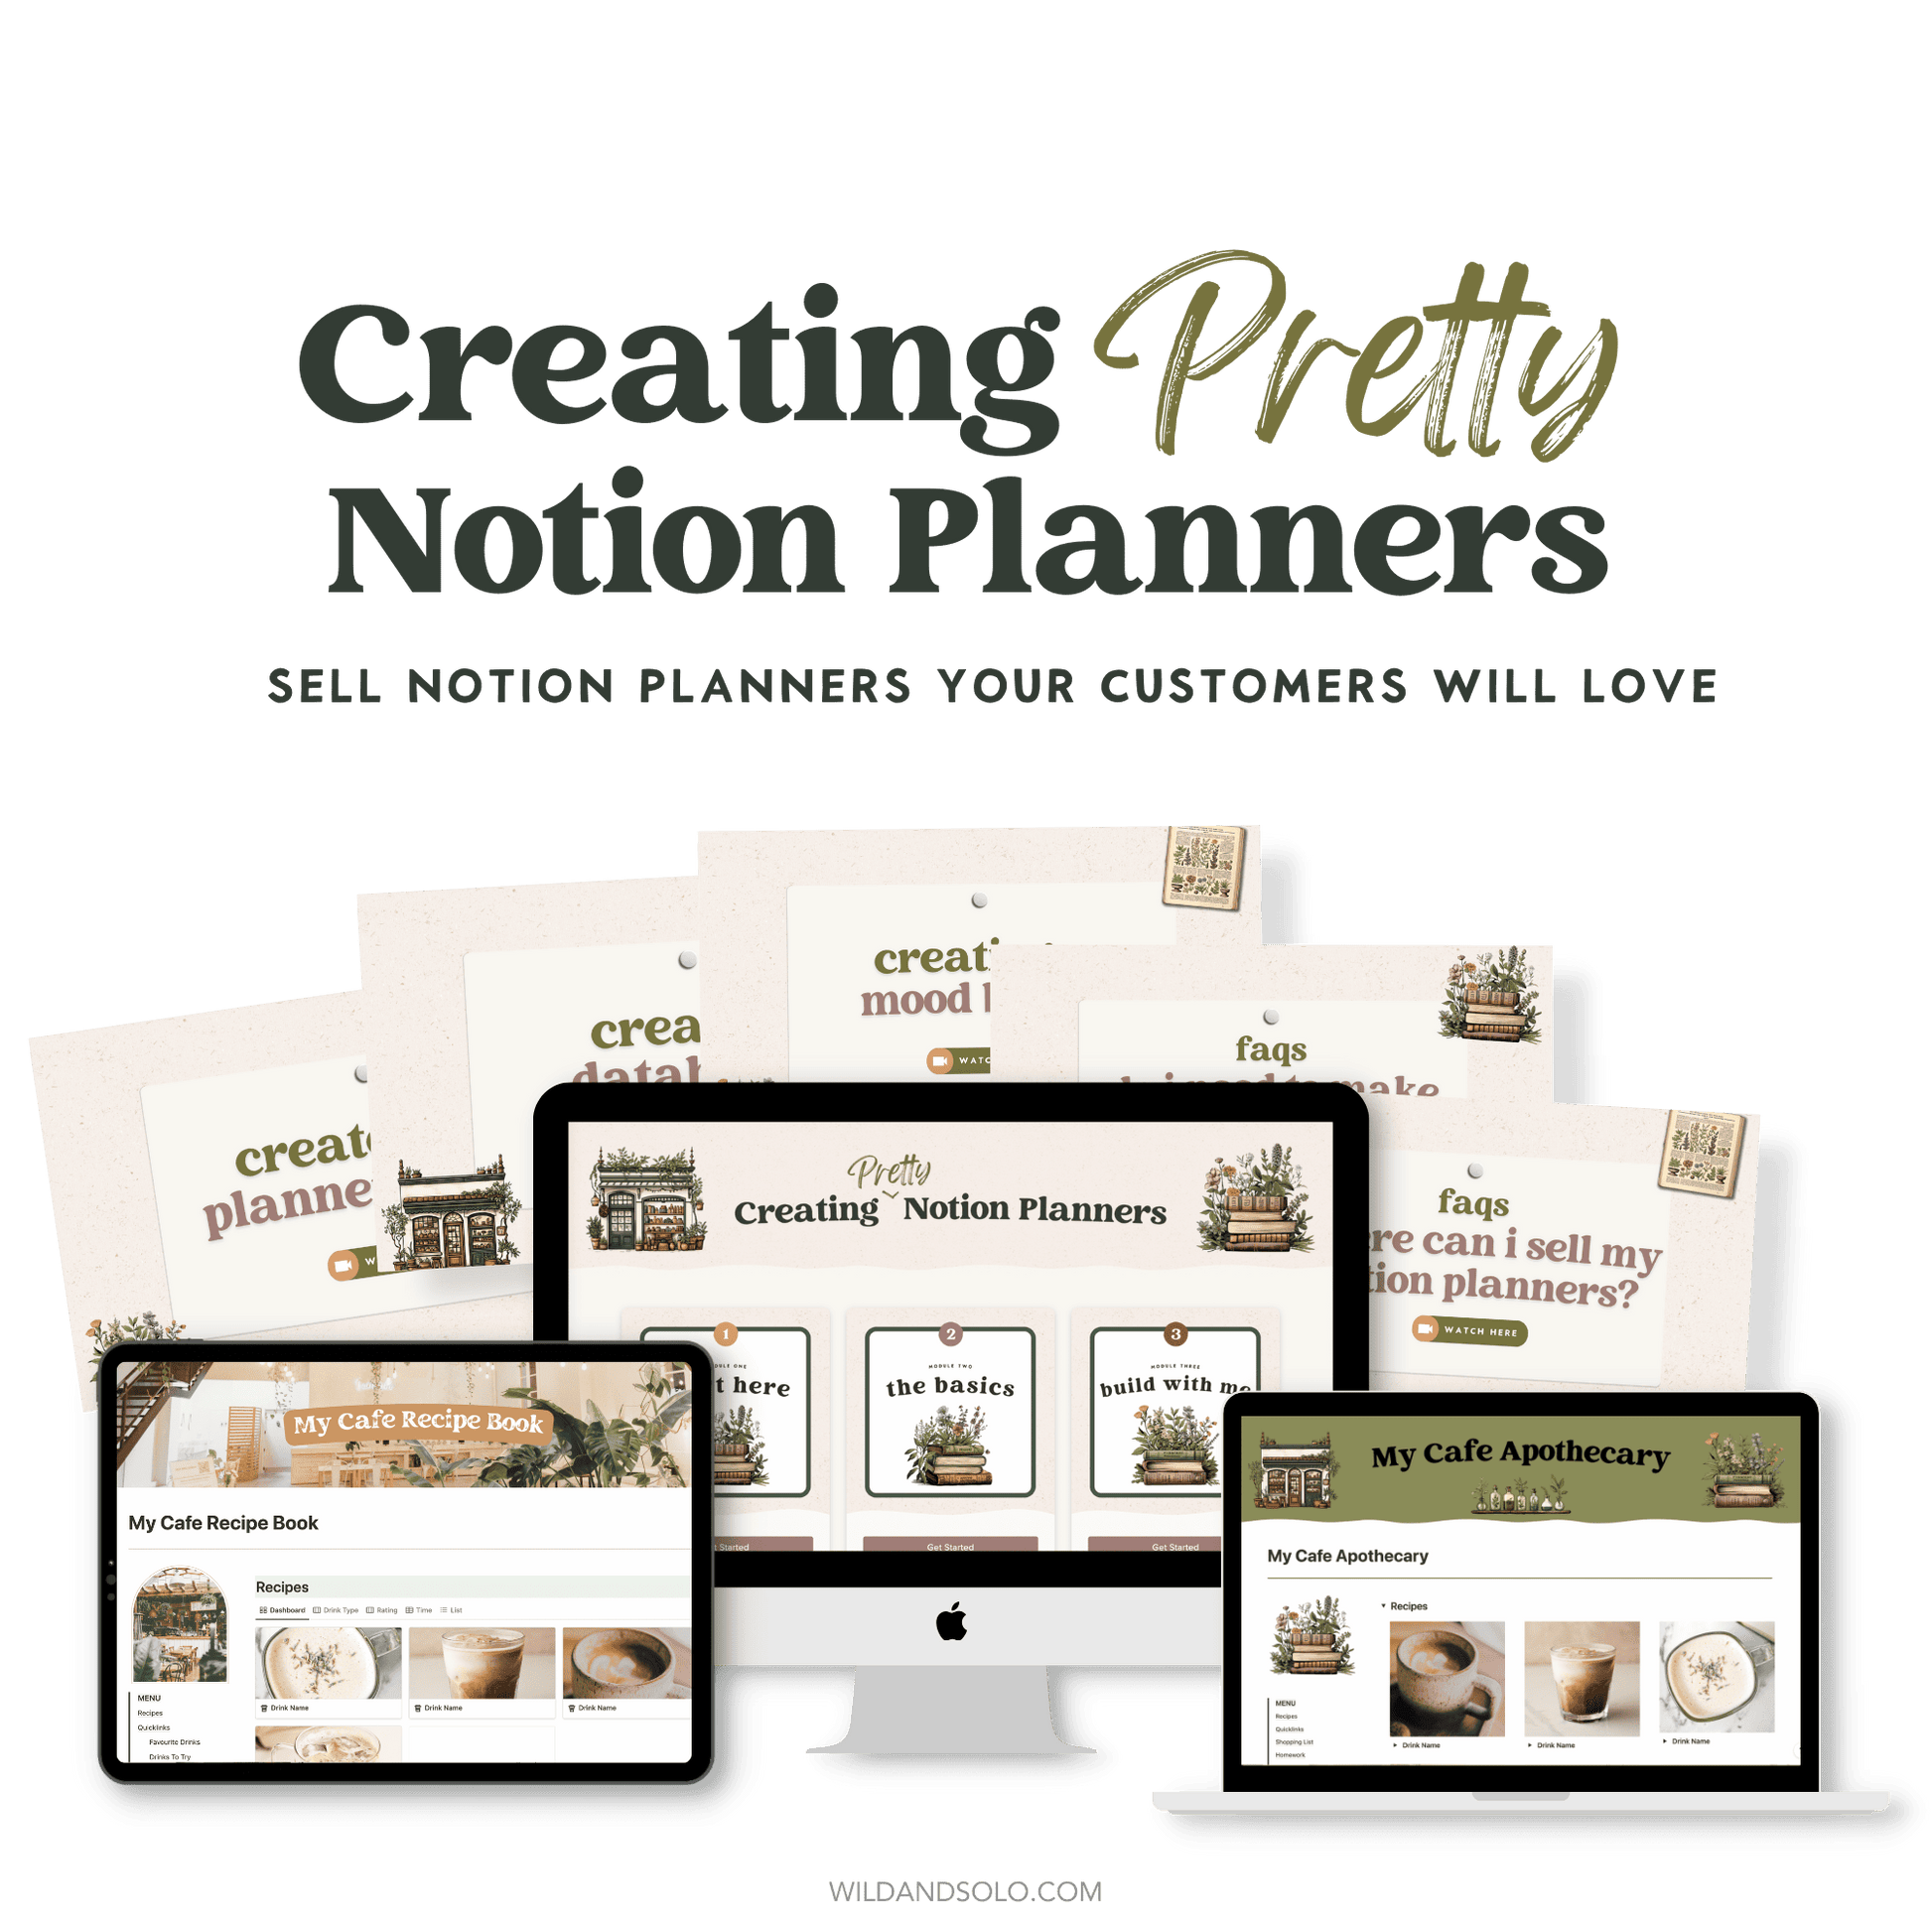 Creating Pretty Notion Planners Mini Course shown on a laptop